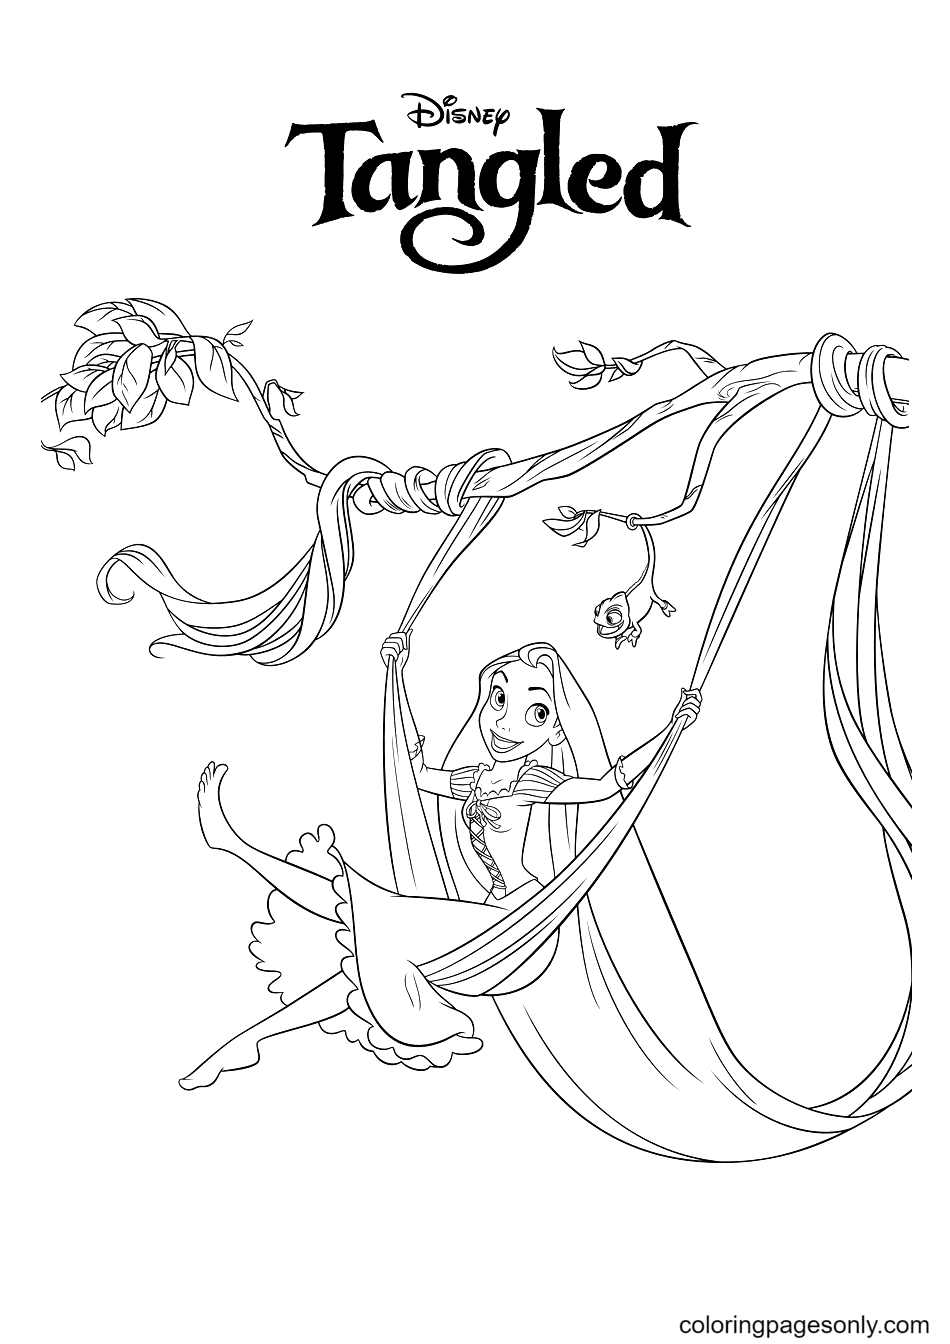 Printable Disney Tangled Coloring Pages